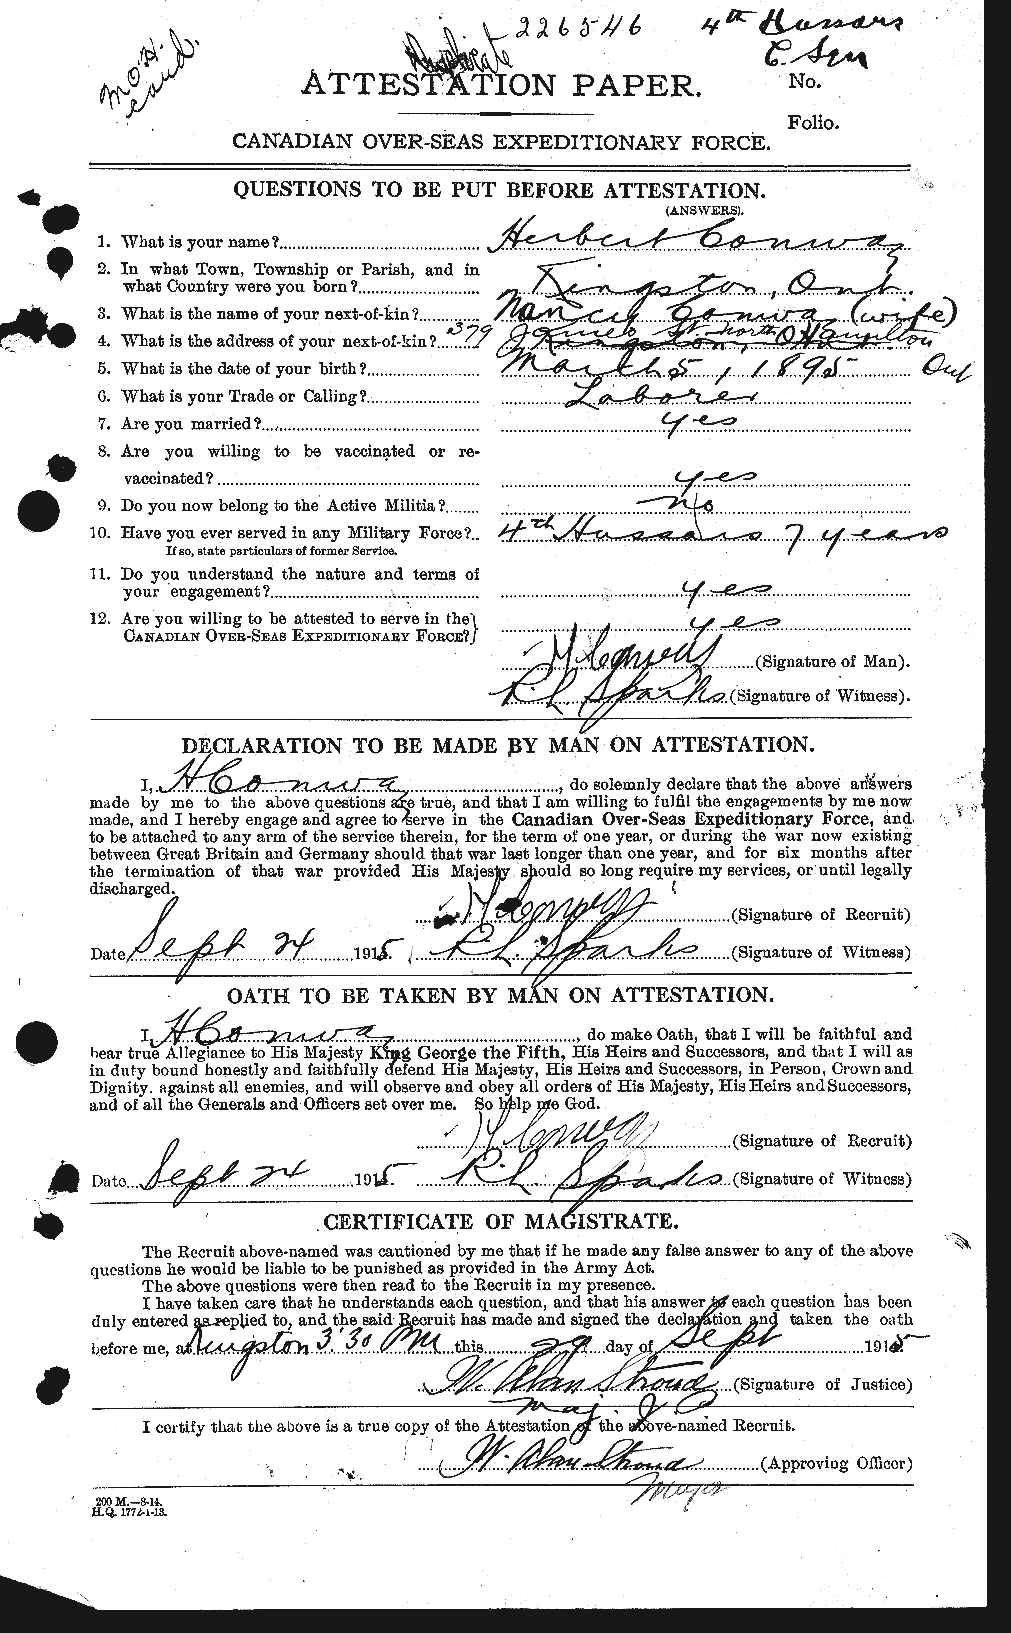 Personnel Records of the First World War - CEF 073362a